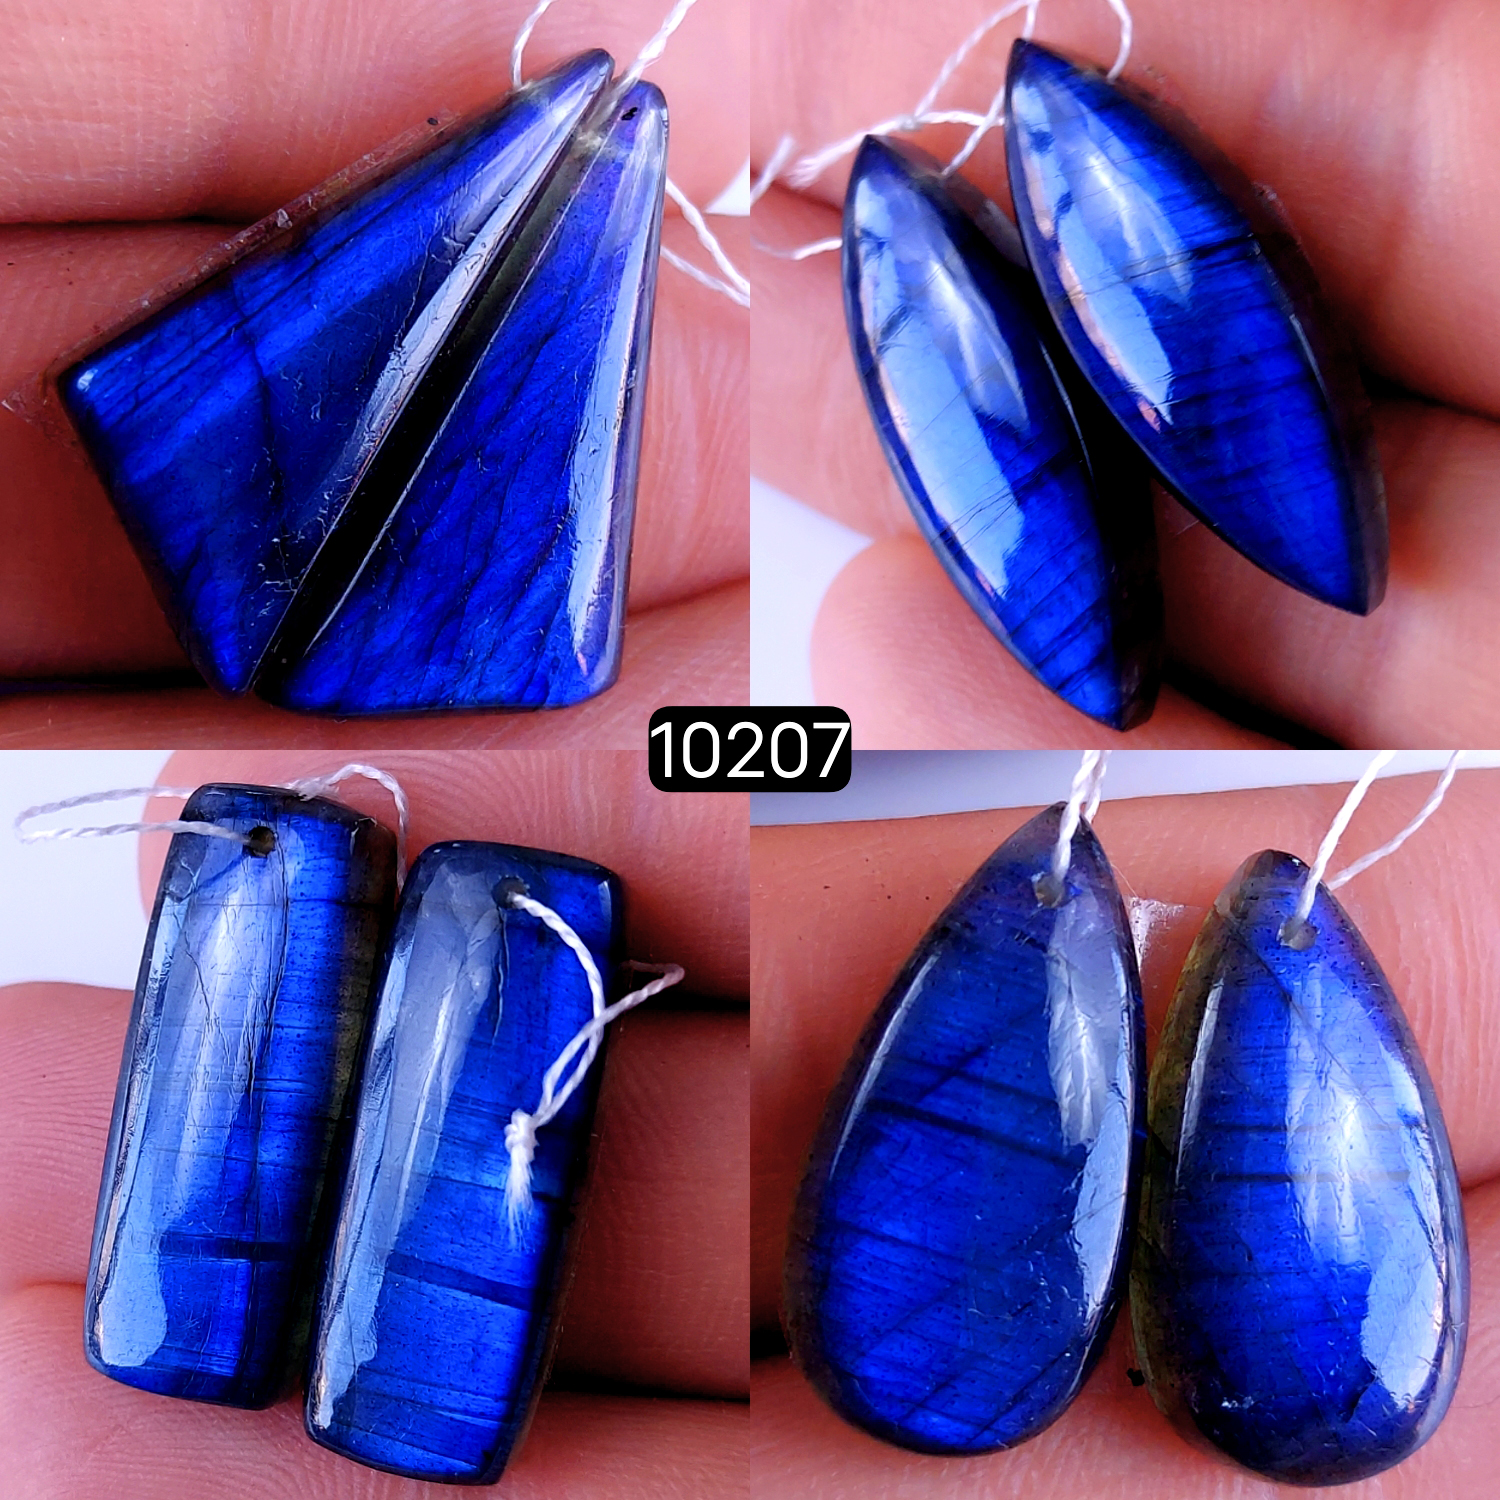 4Pair 107Cts Natural Labradorite Crystal Drill Dangle Drop Earring Pairs Silver Earrings Blue Labradorite Hoop Jewelry  26x10 22x12mm #10207